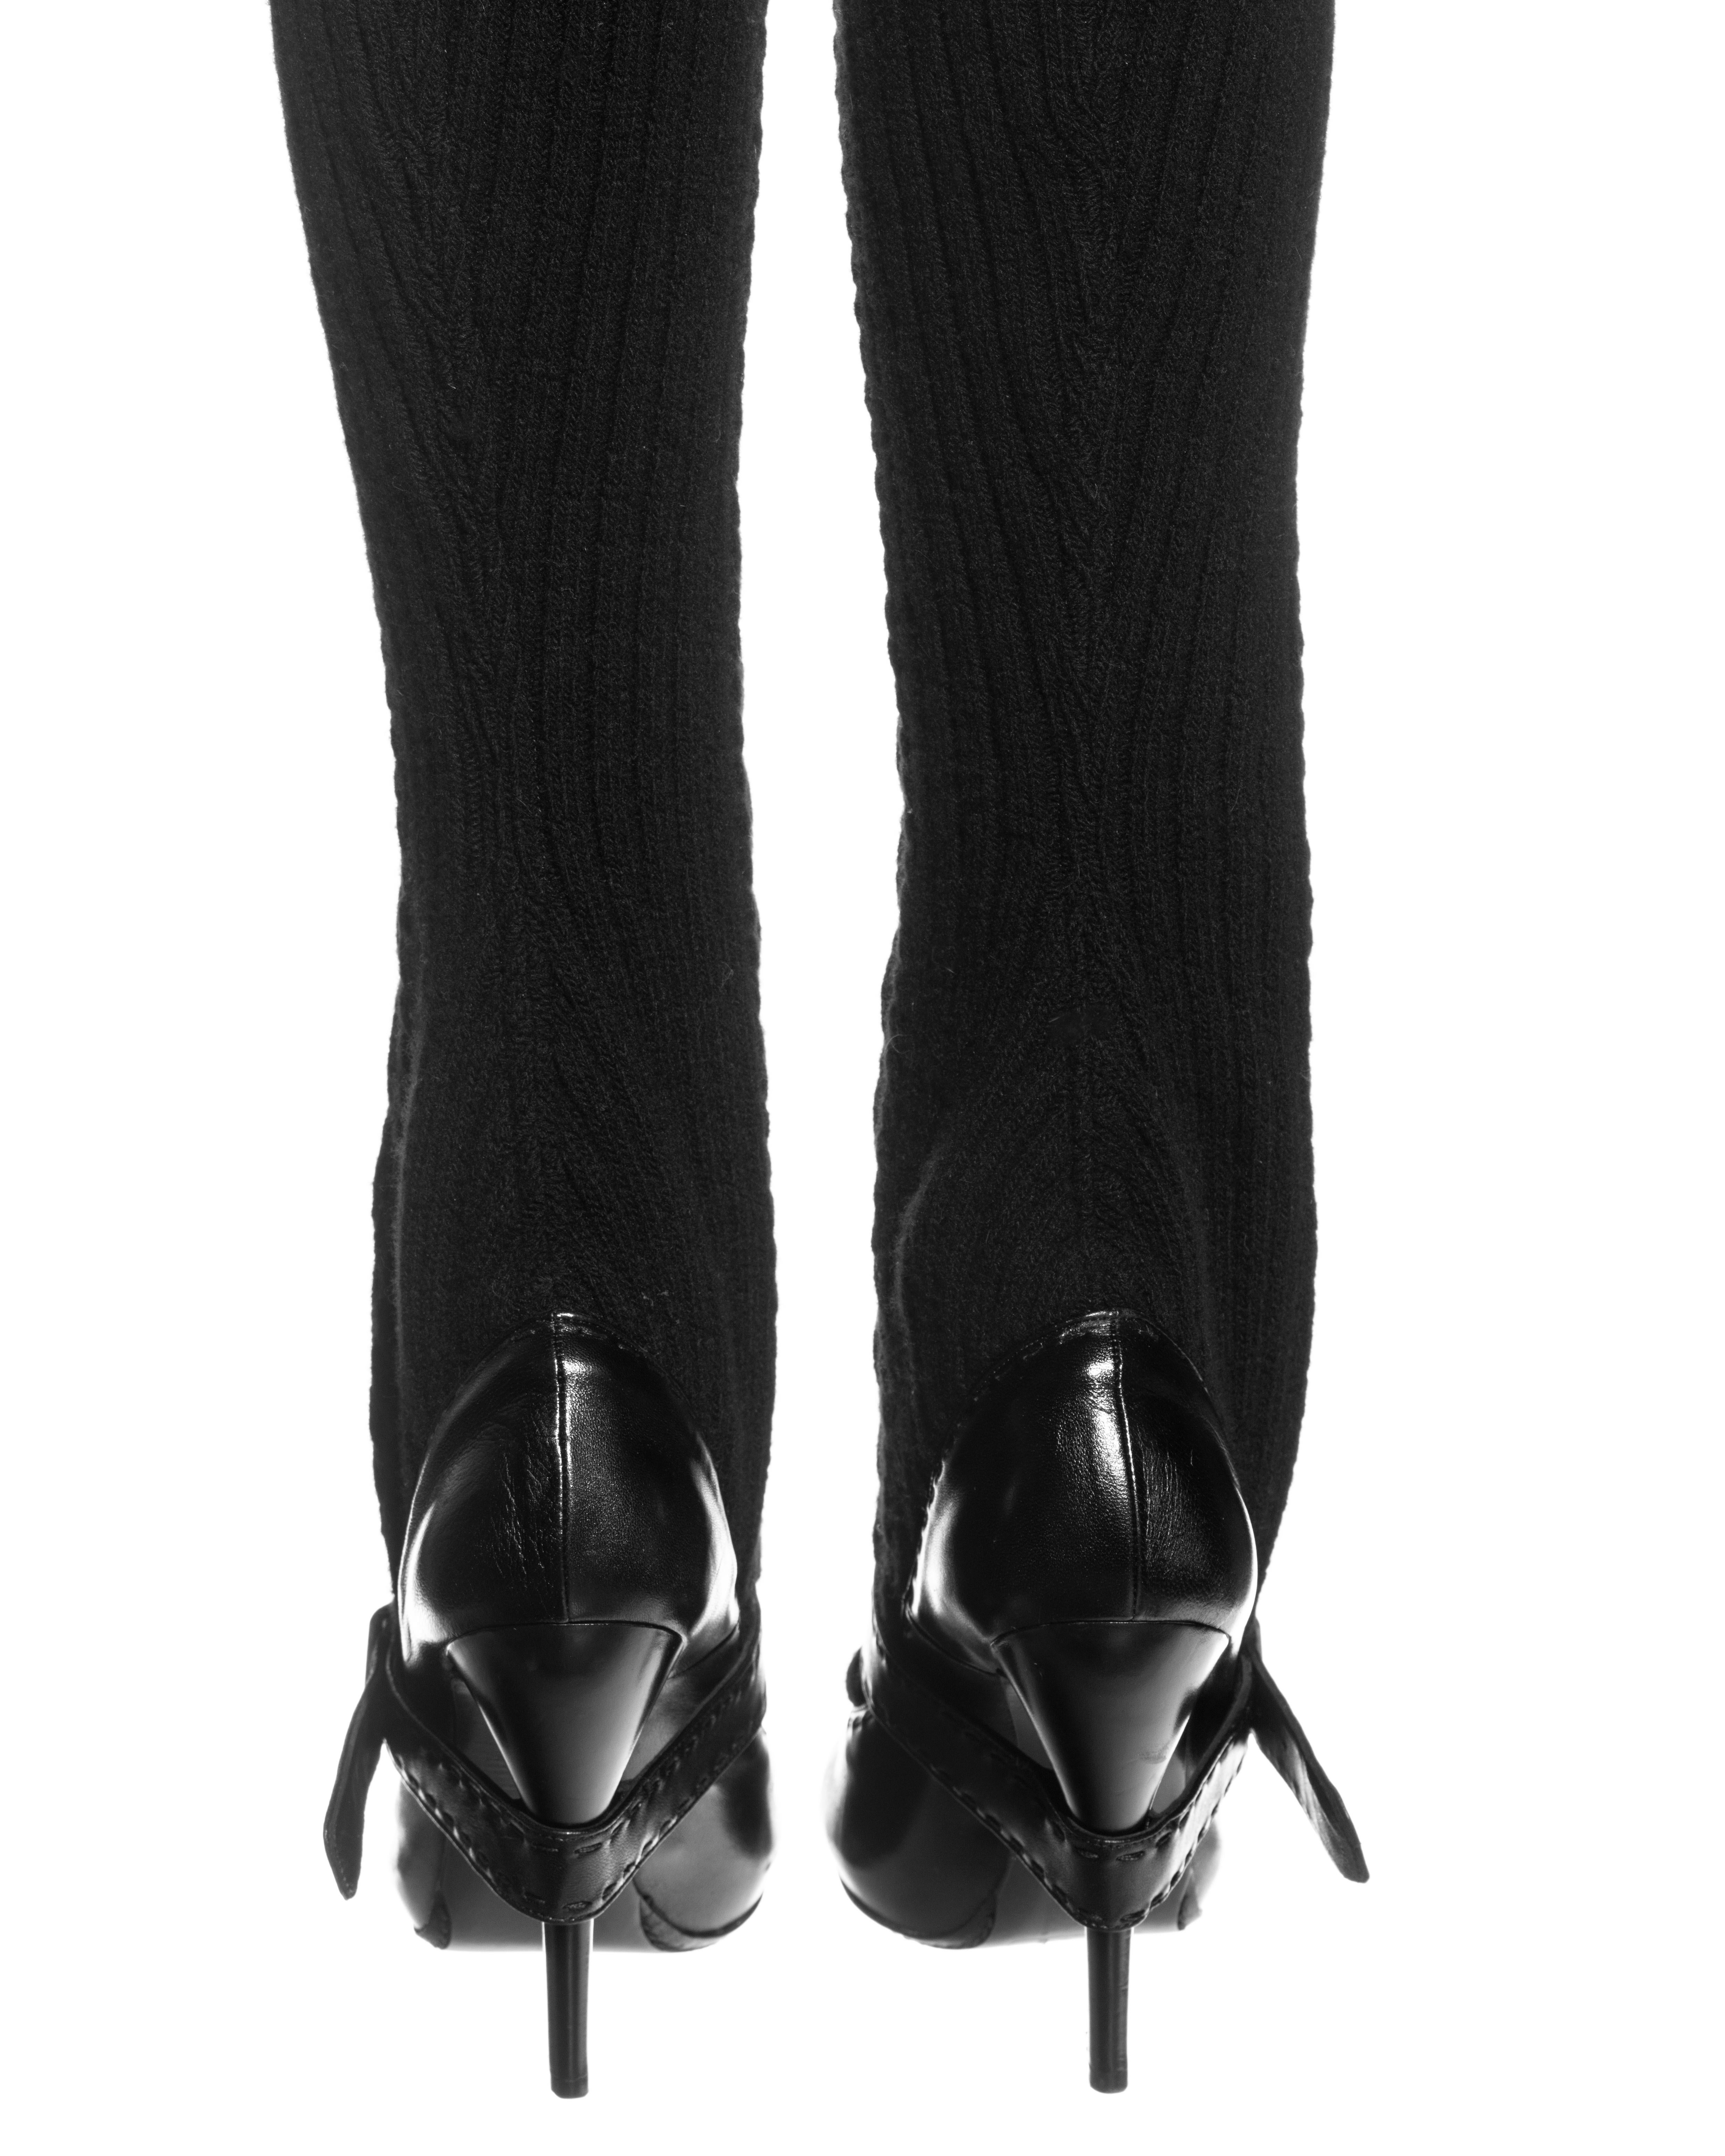 Alexander McQueen black leather thigh-high sock boots, fw 2006 For Sale 1